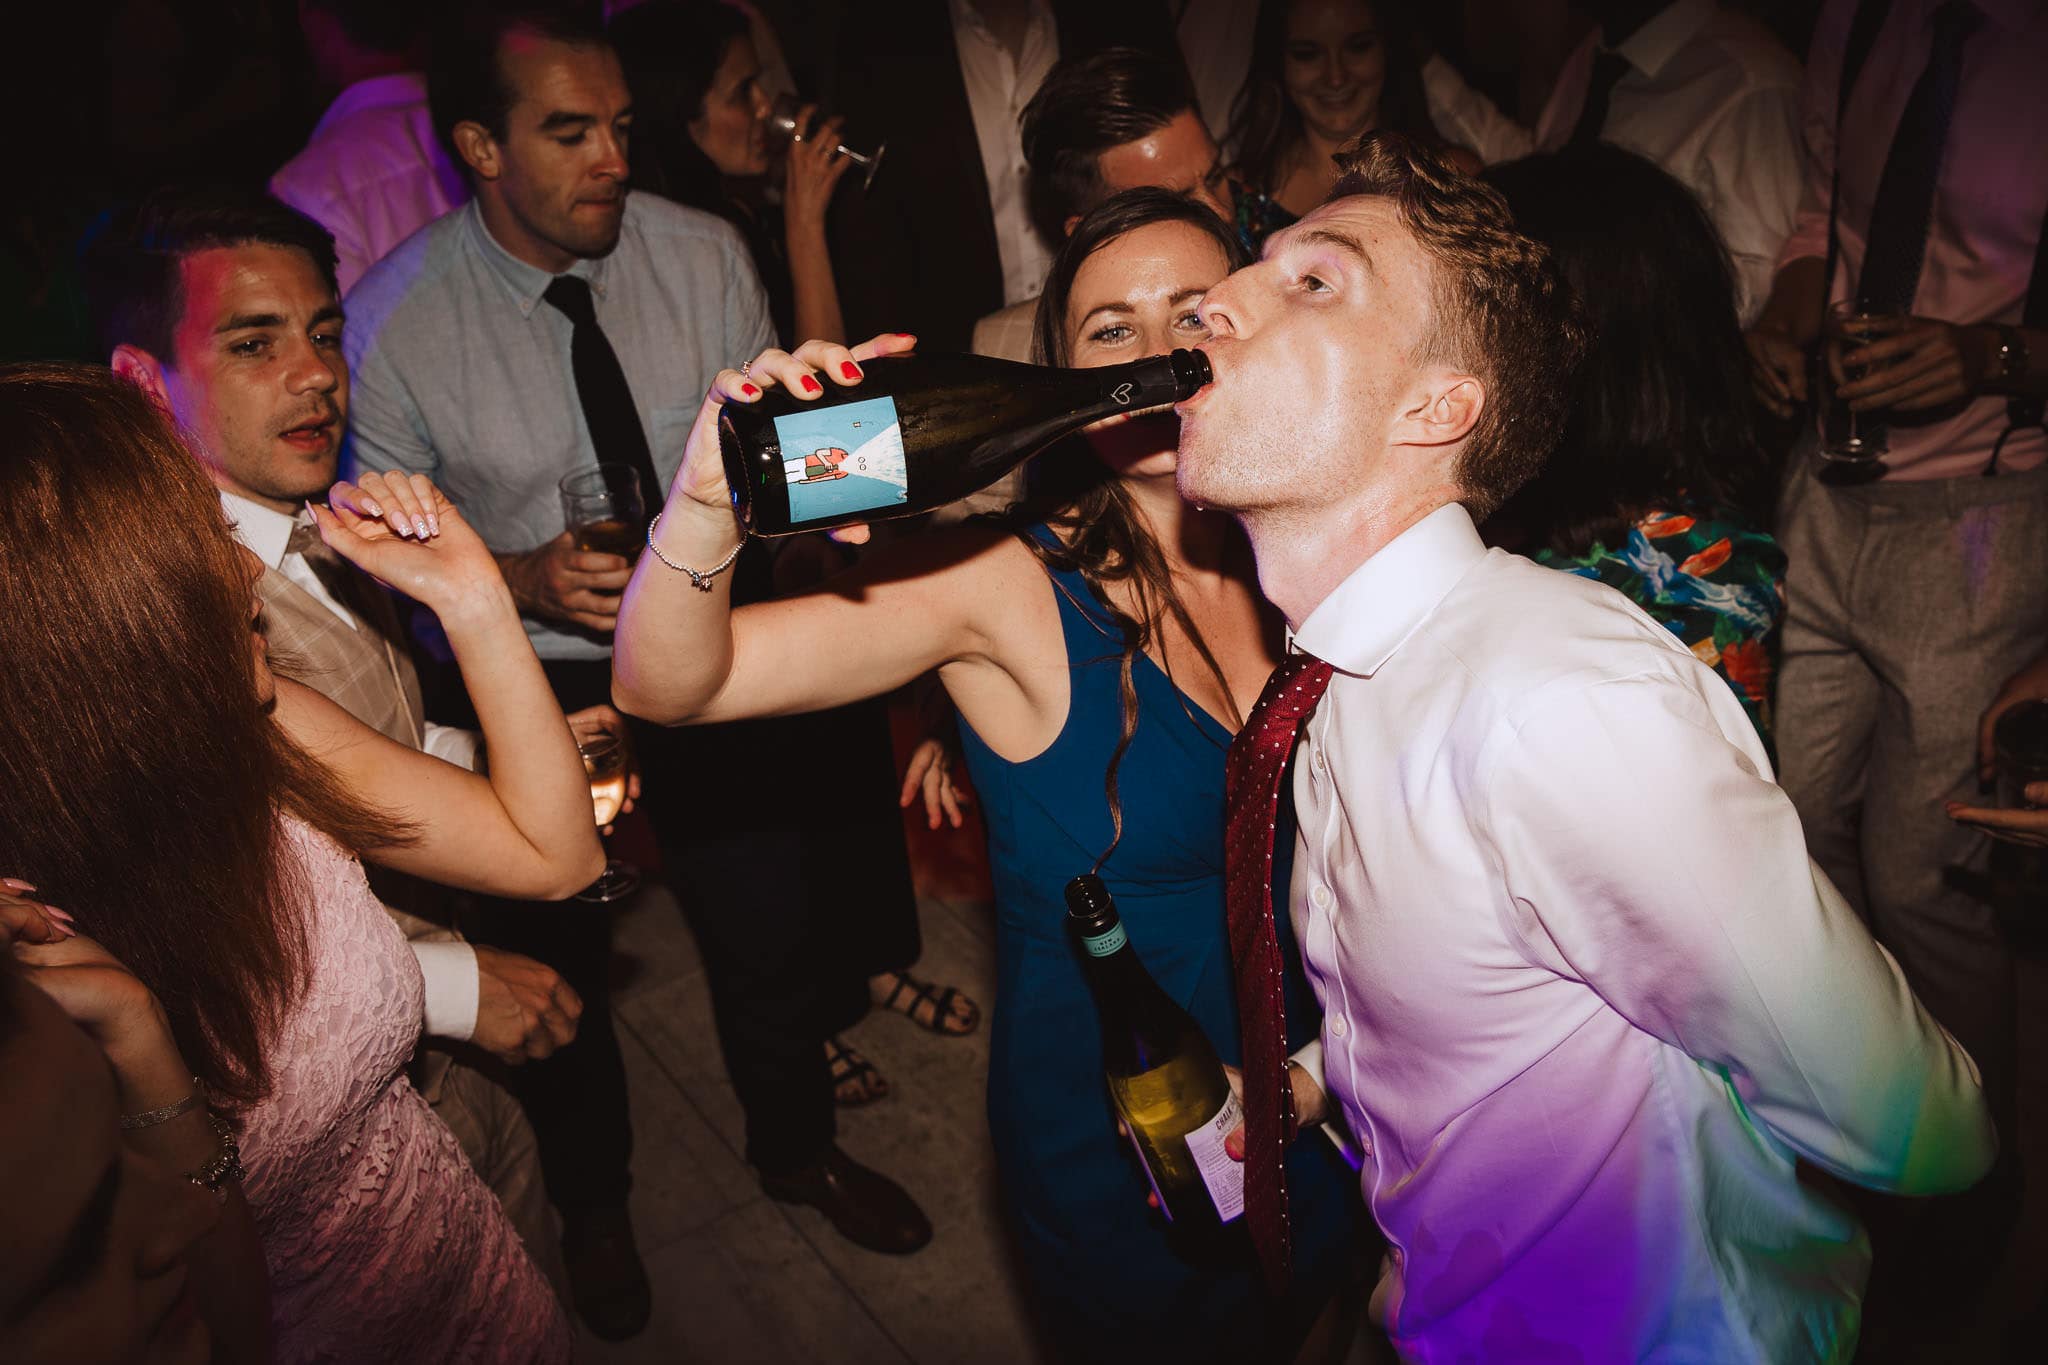 drinking champagne from the bottle on the dance floor